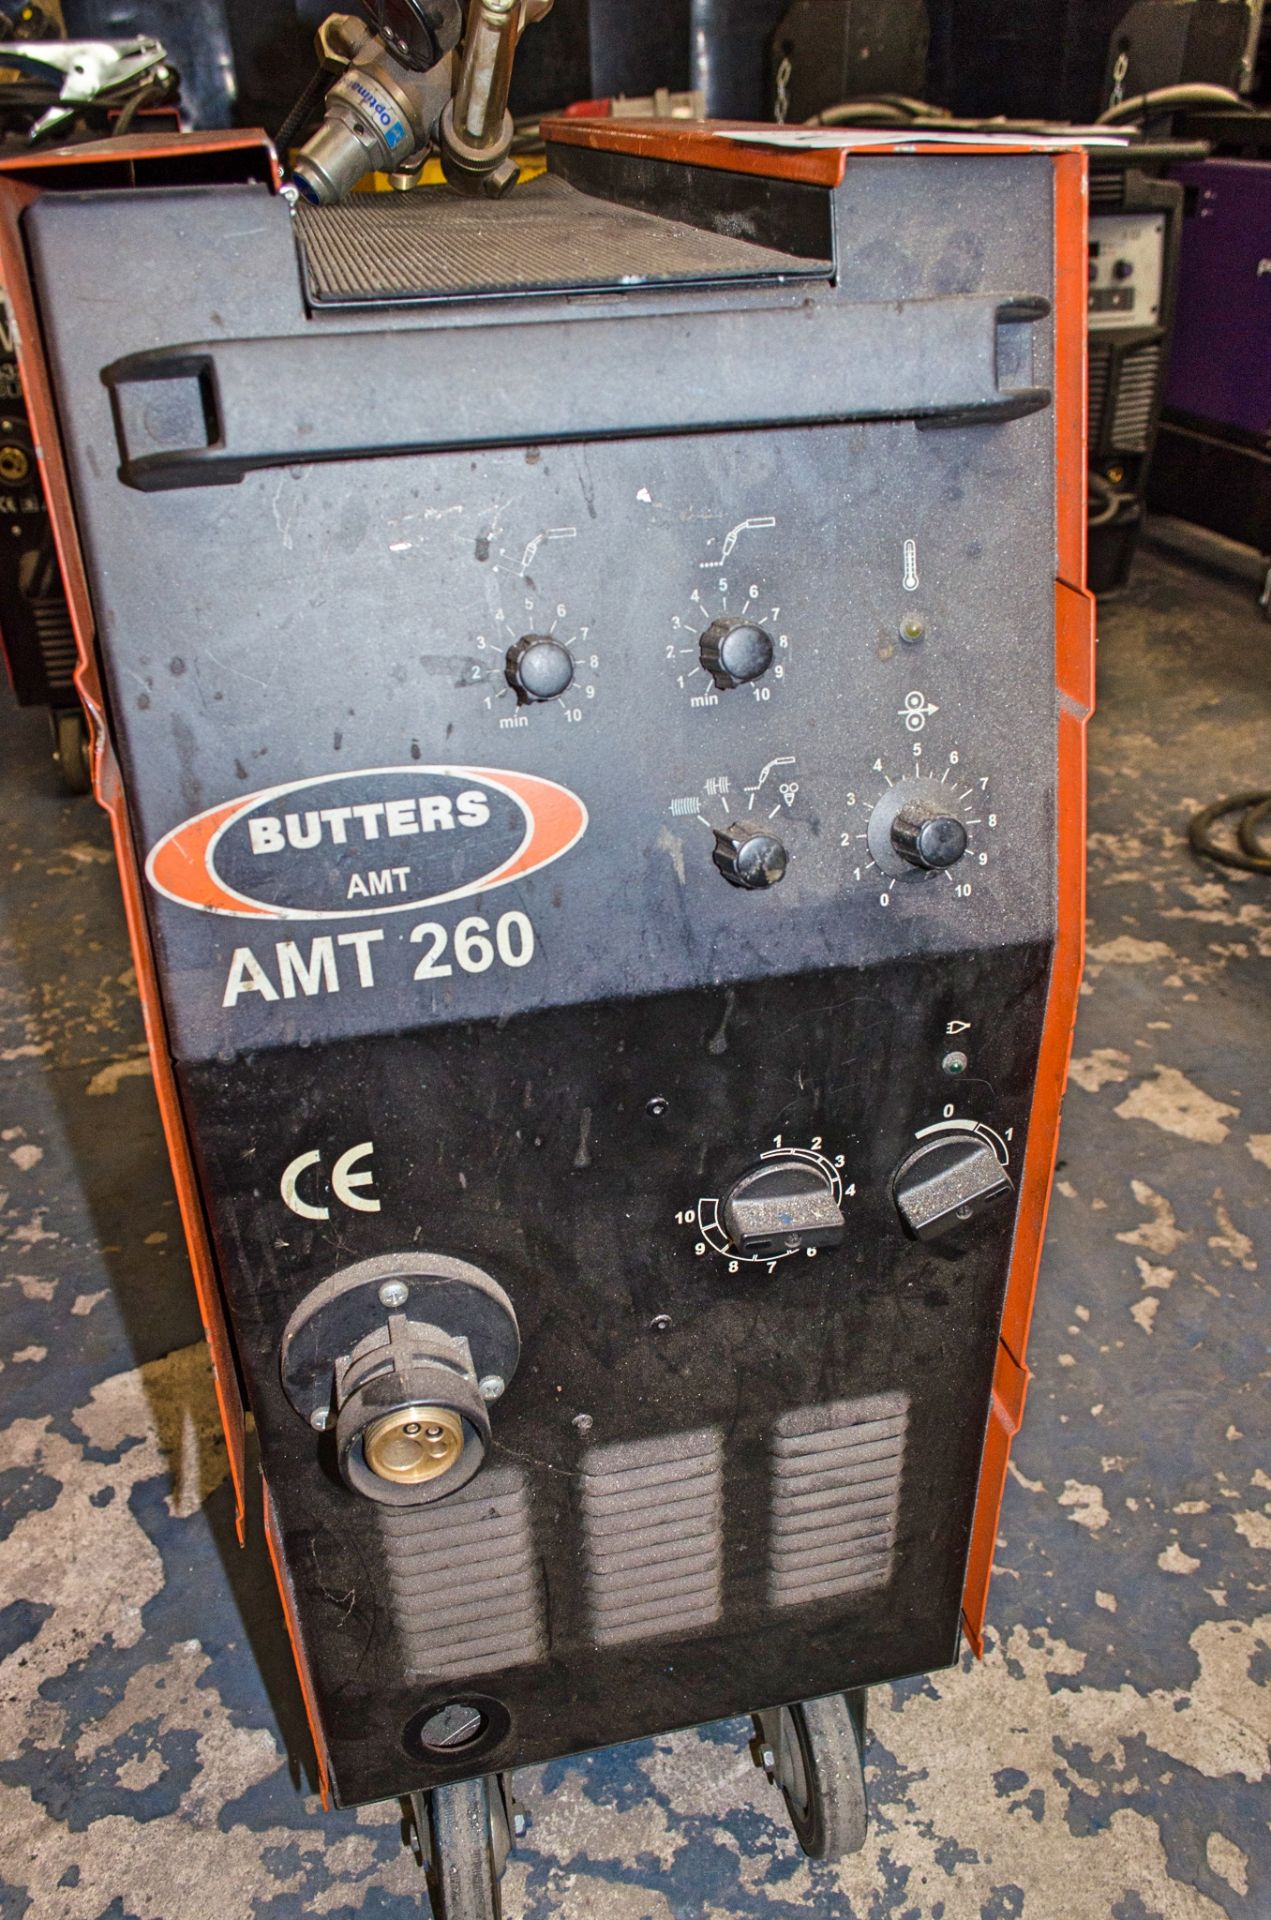 Butters AMT 260 mig welding set - Image 3 of 3